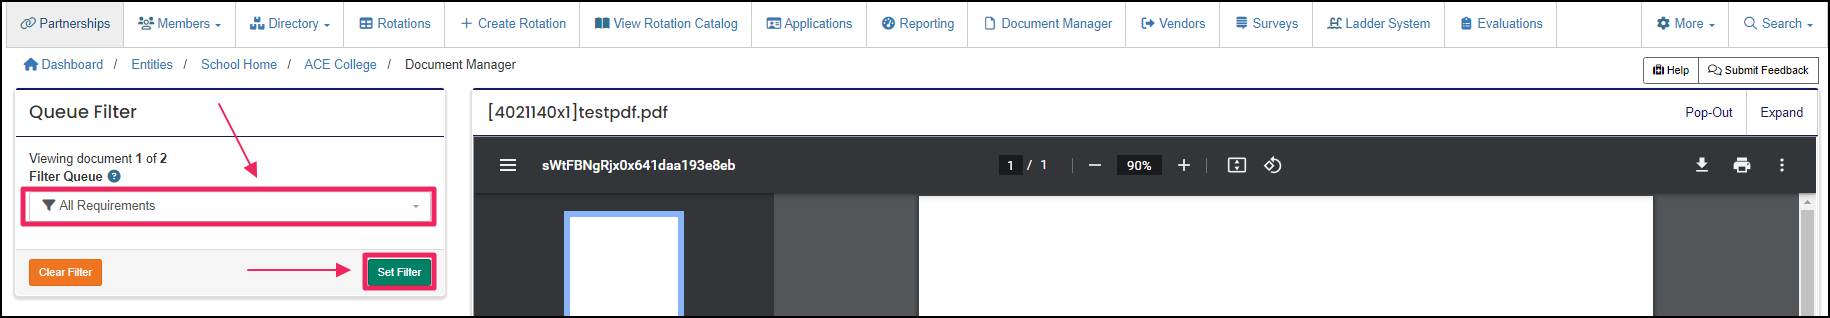 Image shows document queue requirement filter.